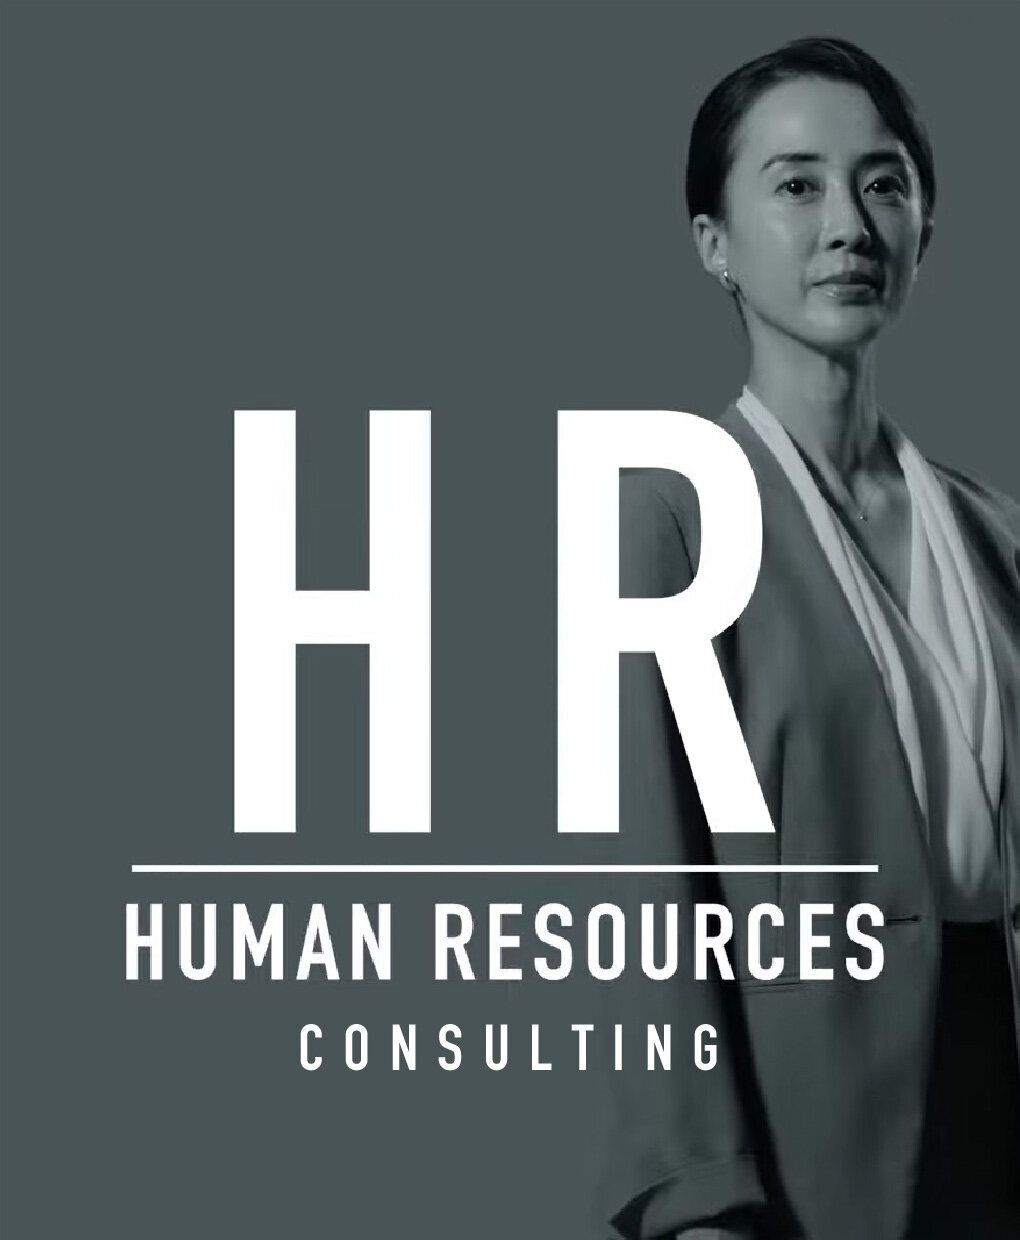 HUMAN RESOURCES CONSULTING